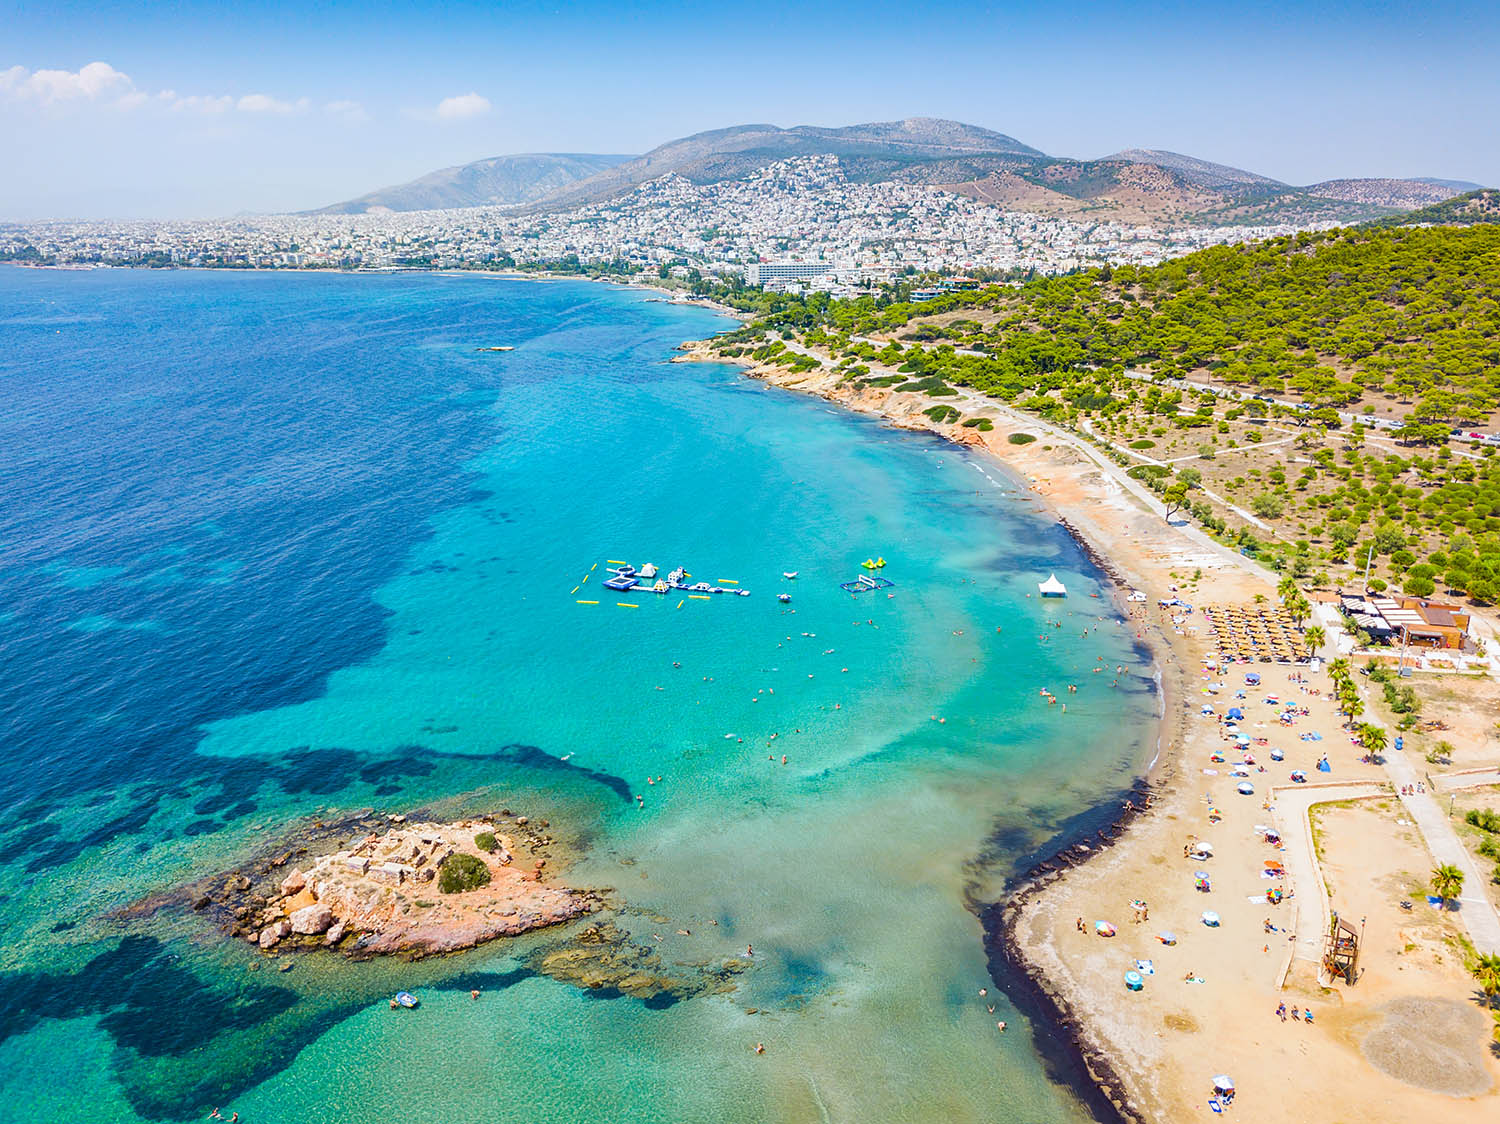 Aerial view of the Beach of Kavouri in south Athens, Greece, with turquoise waters and view to the city